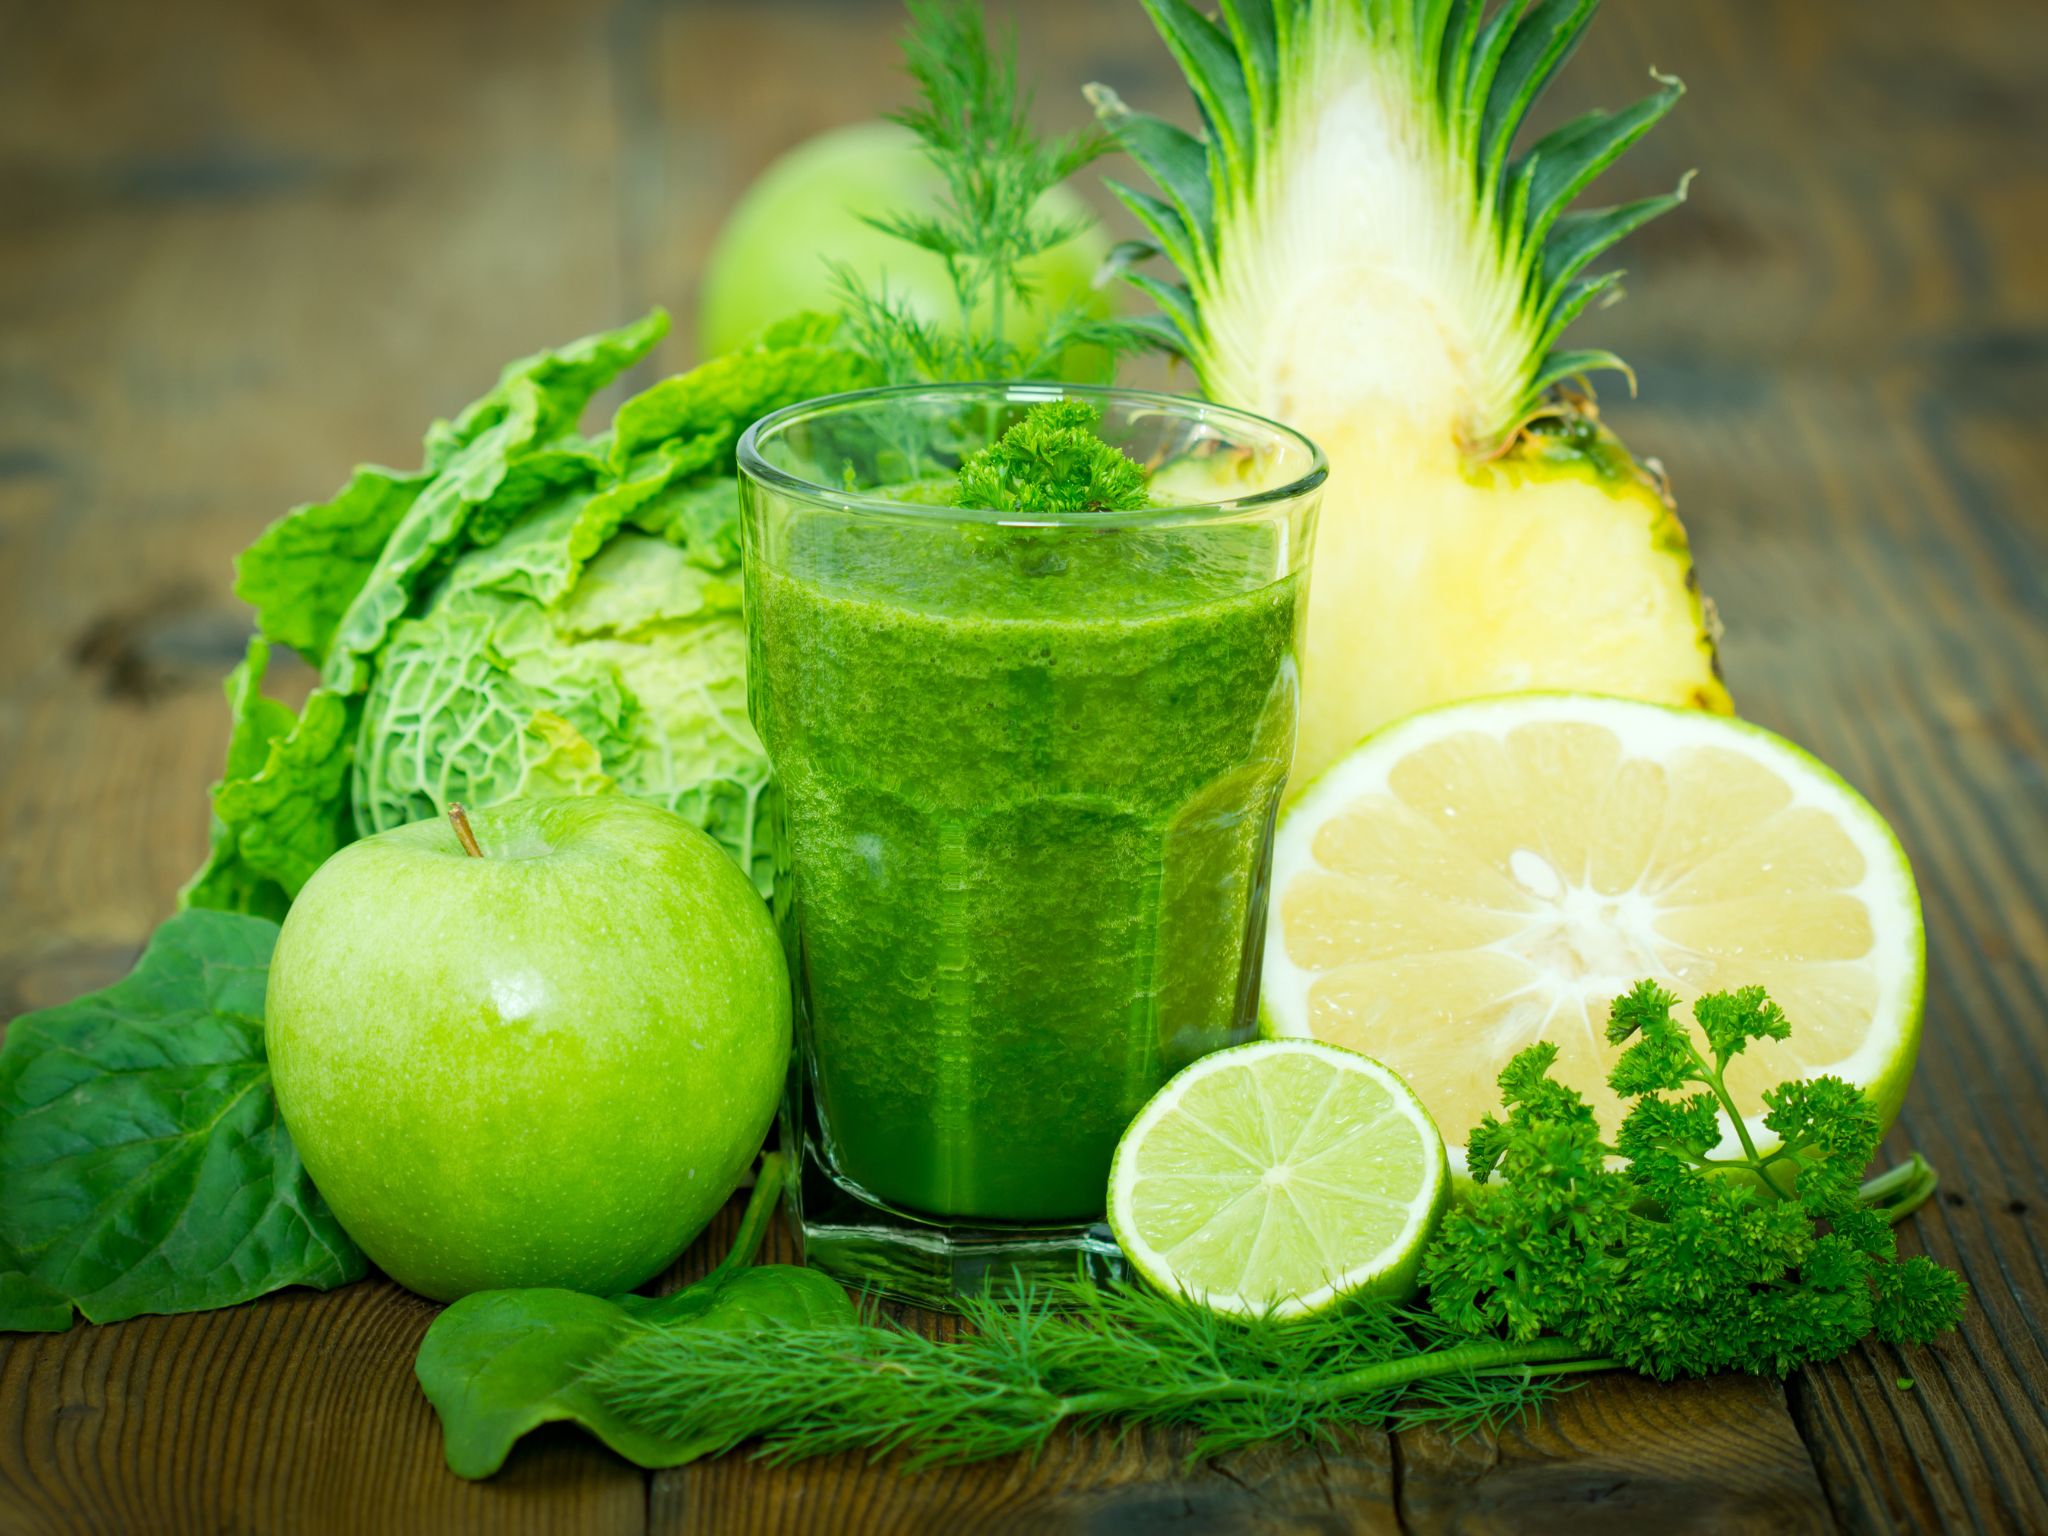 The power of anti-aging pineapple and cabbage juice